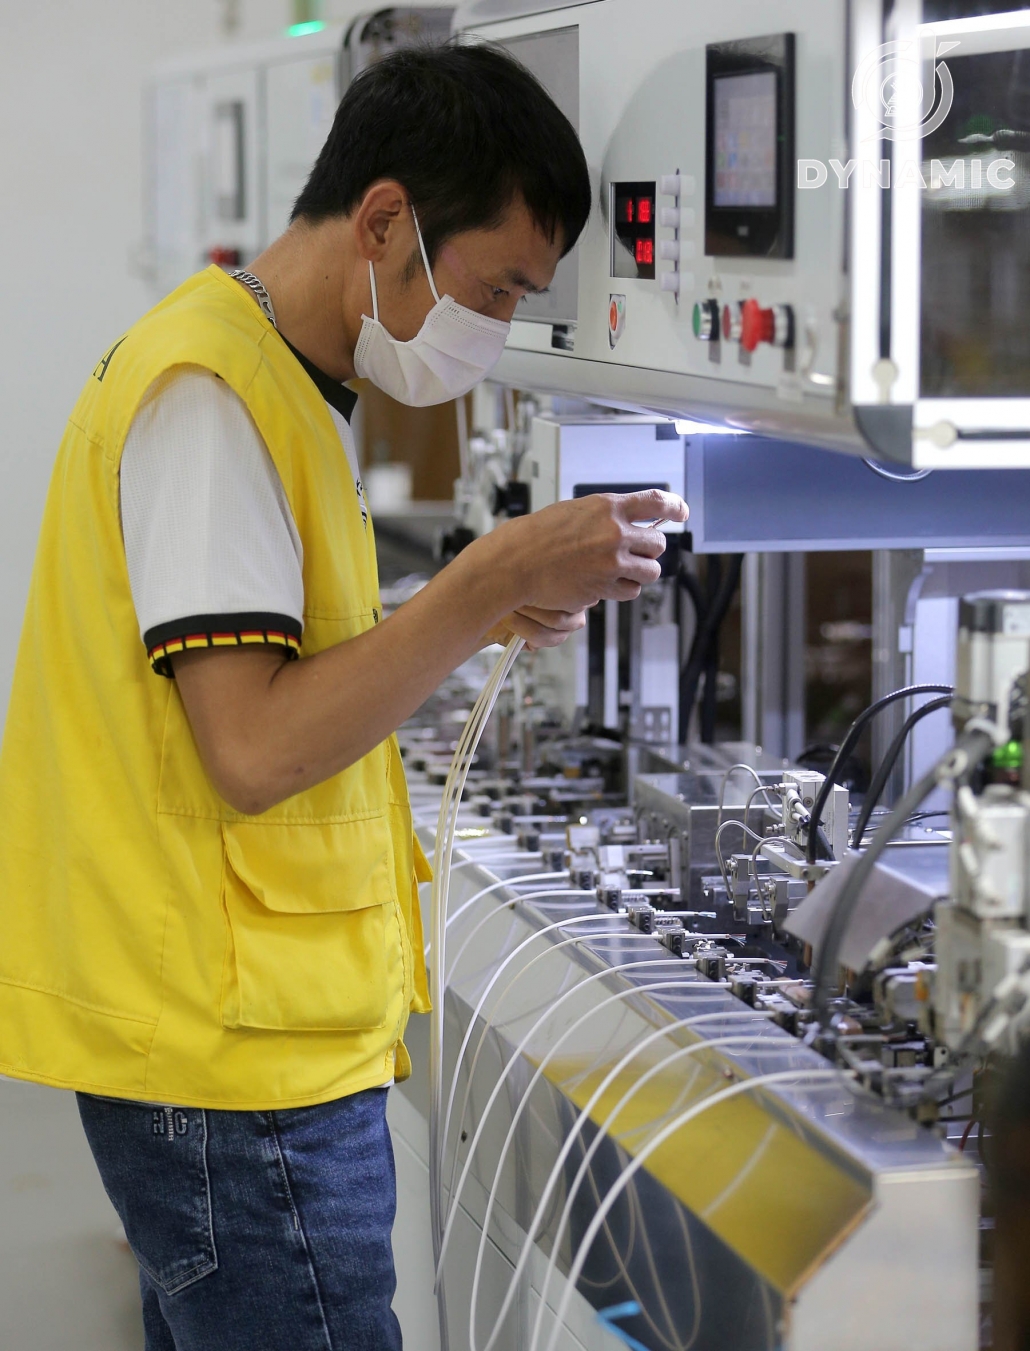 Inside DKD Vina phone charger manufacturing company